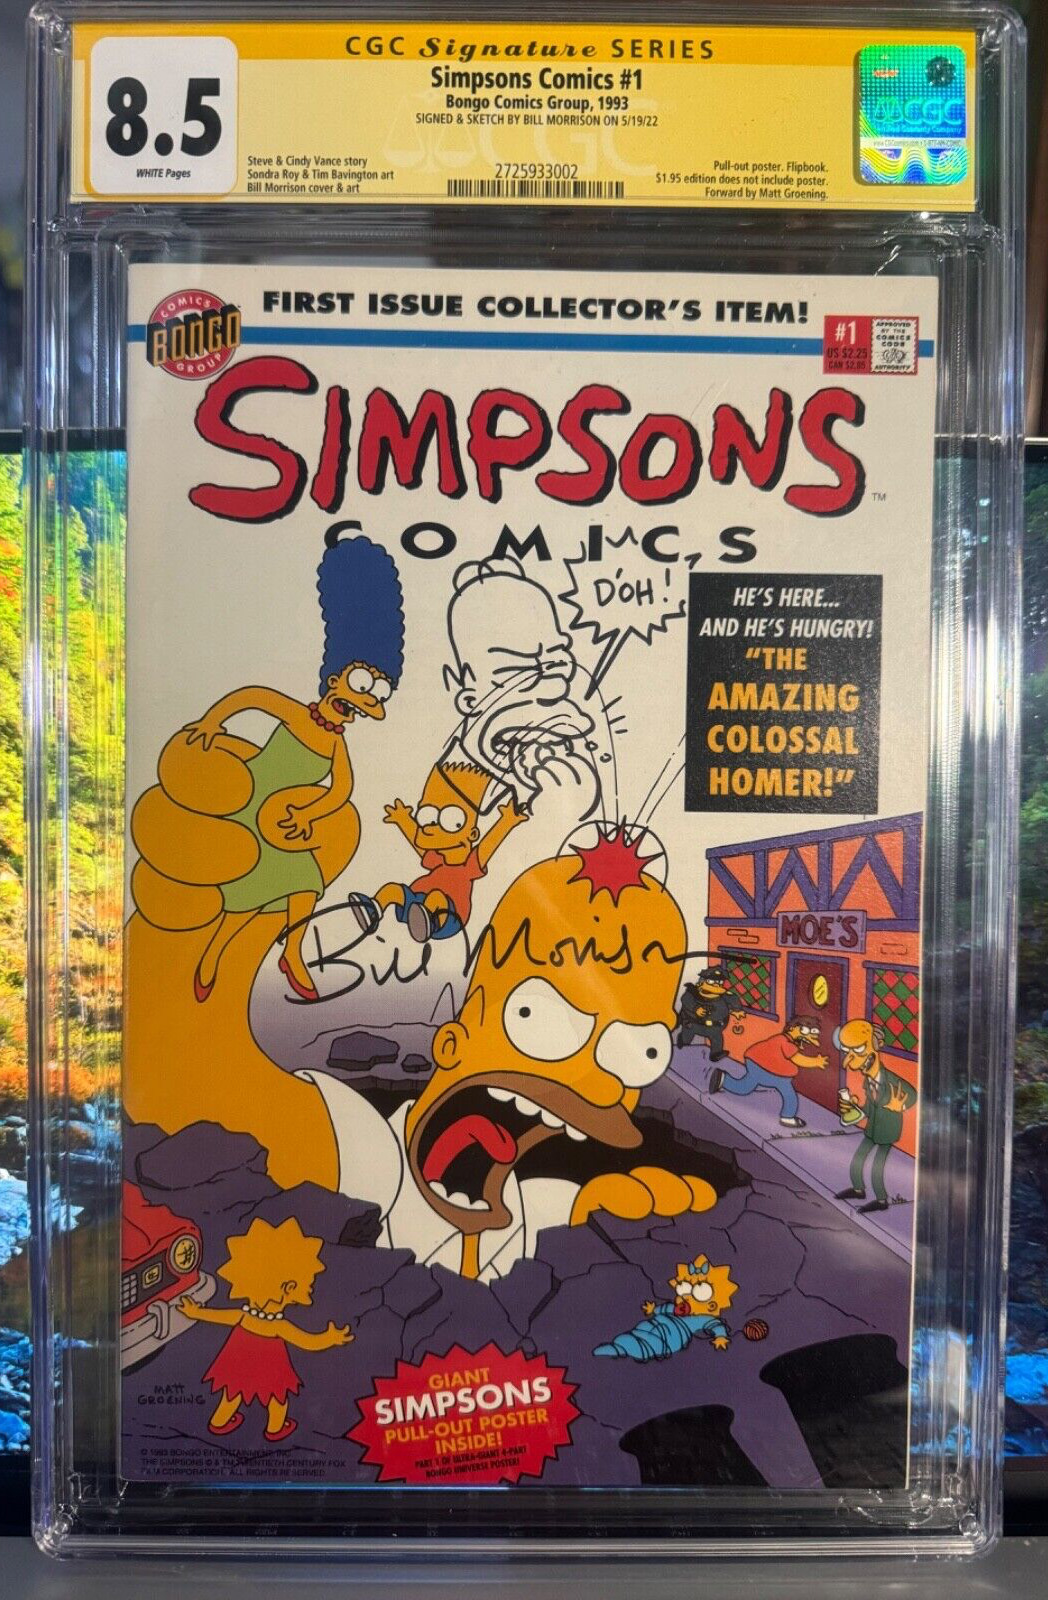 SIMPSONS COMICS #1 SS CGC 8.5 WHITE PAGES SIGNED & HOMER SKETCH BY BILL MORRISON